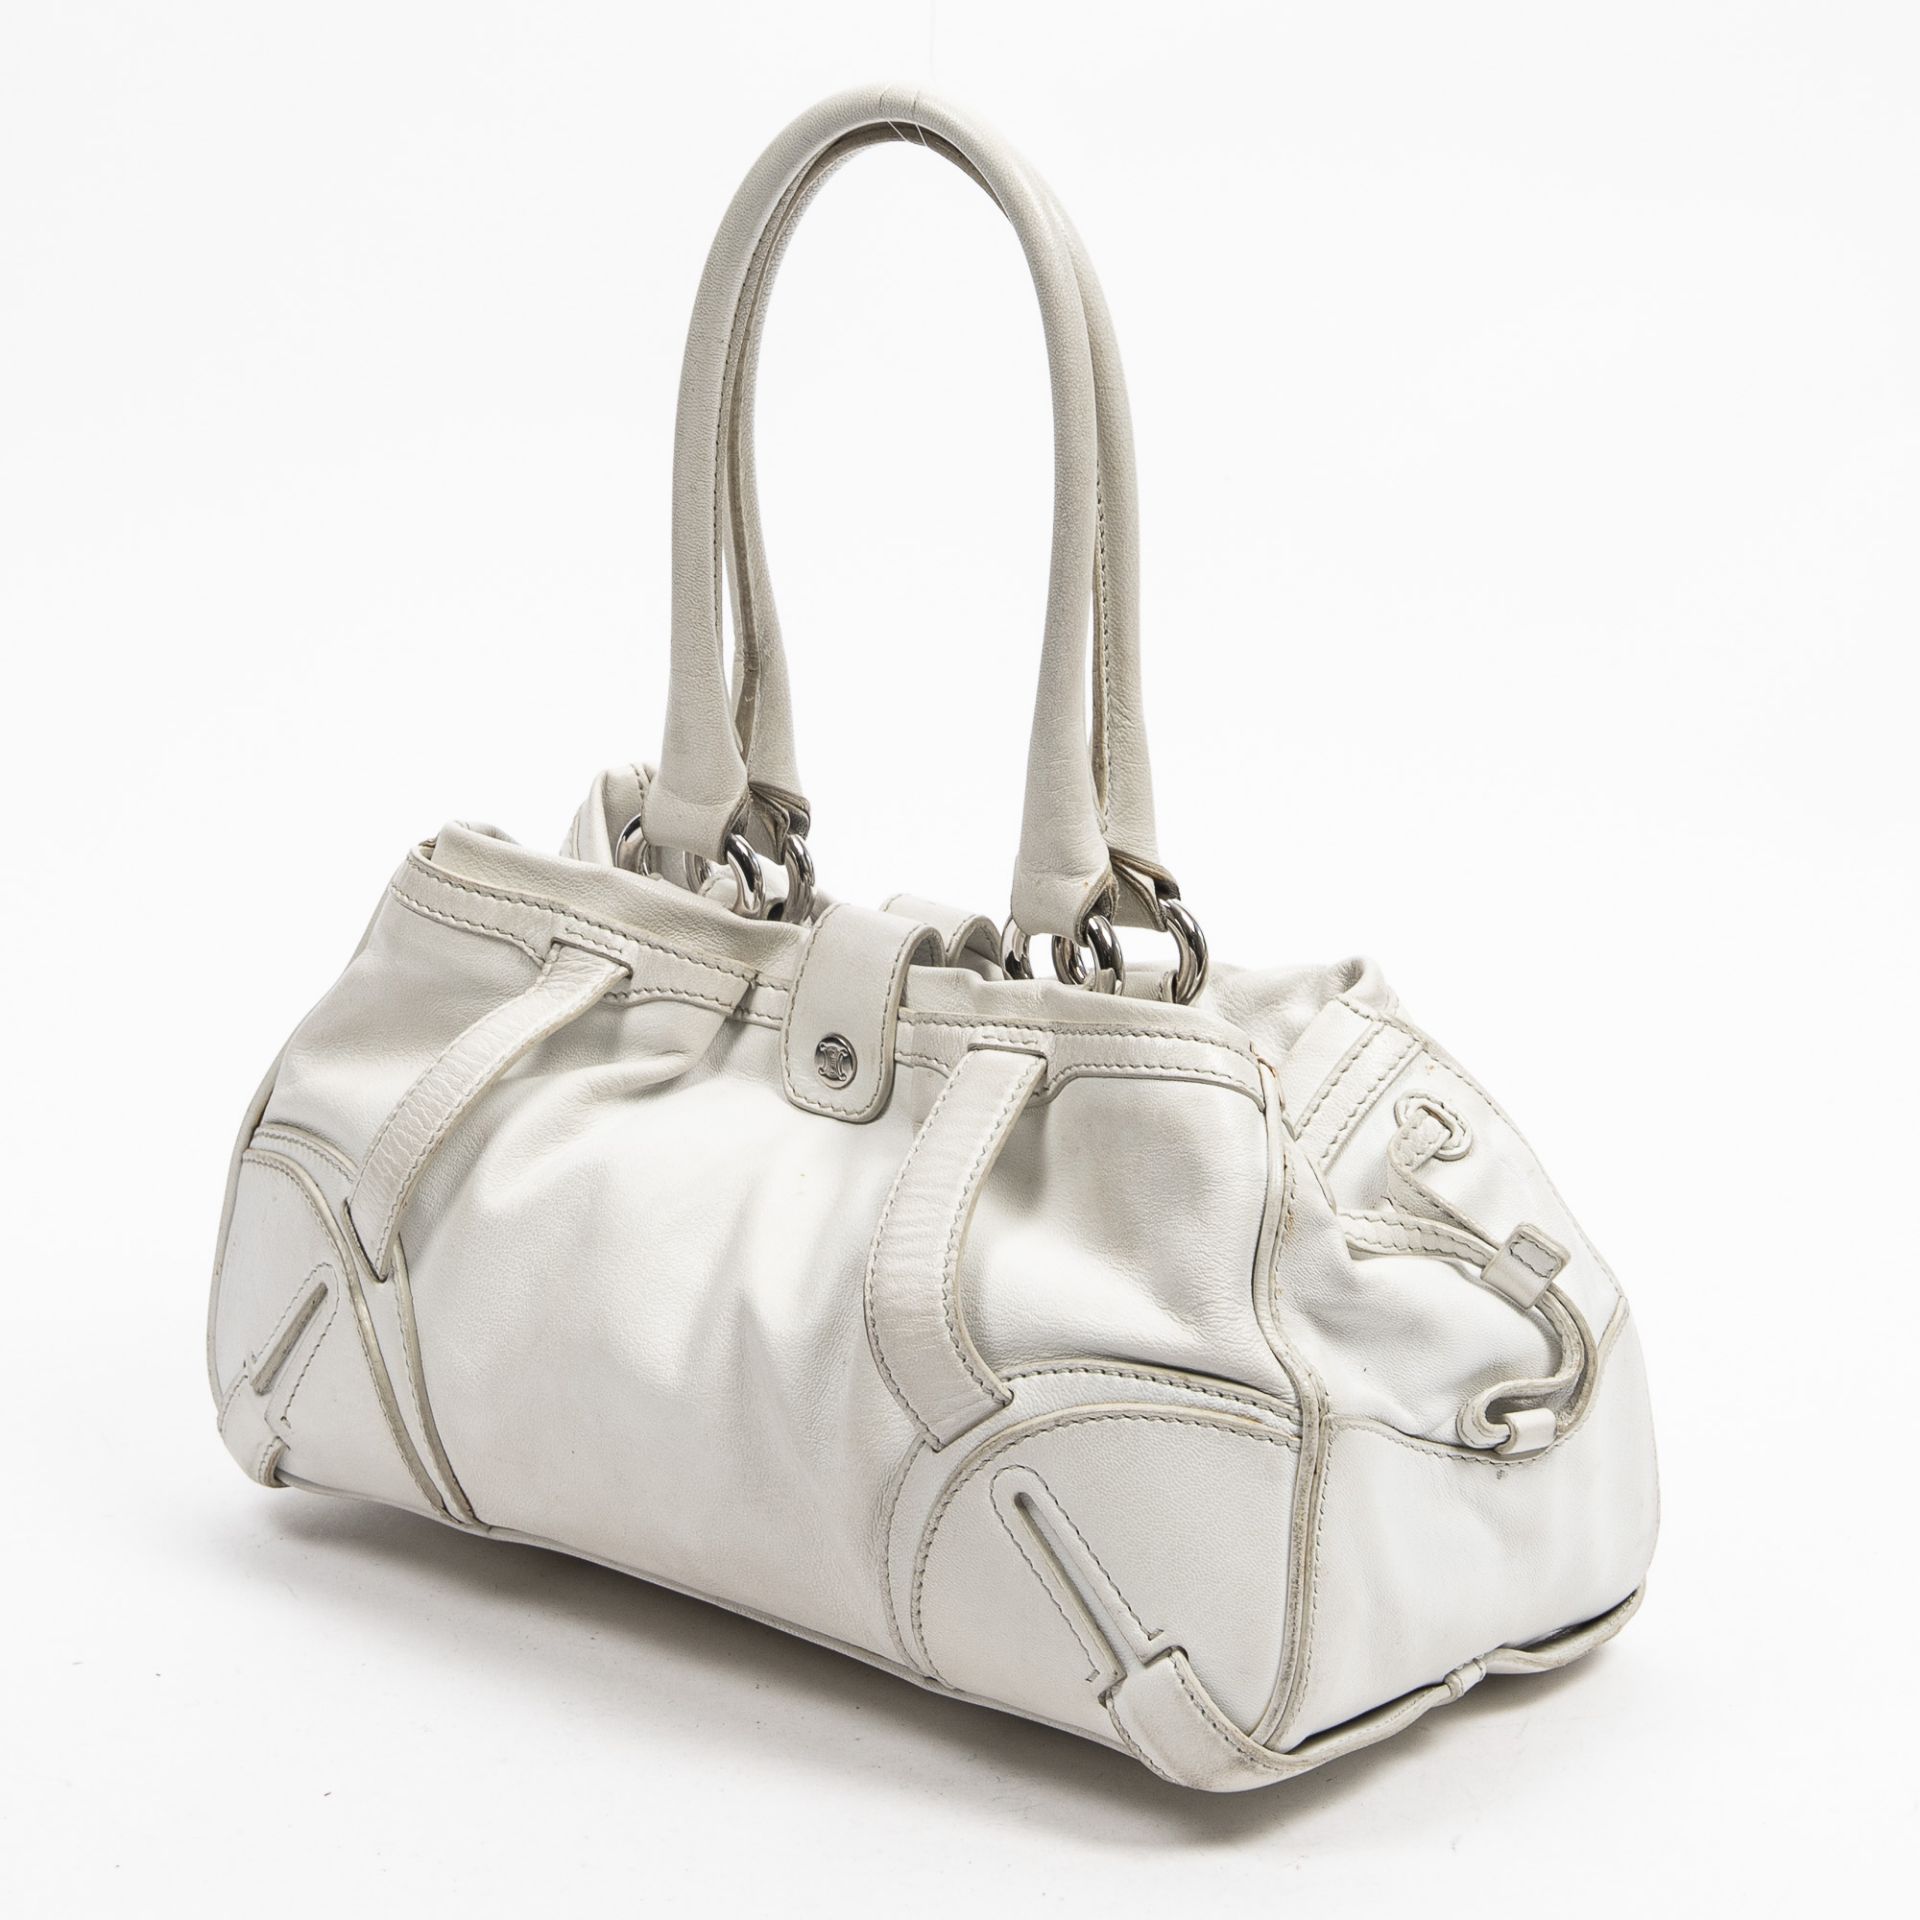 RRP £790.00 Lot To Contain 1 Celine Calf Leather Shoulder Tote Shoulder Bag In White - 34*19* - Image 2 of 2